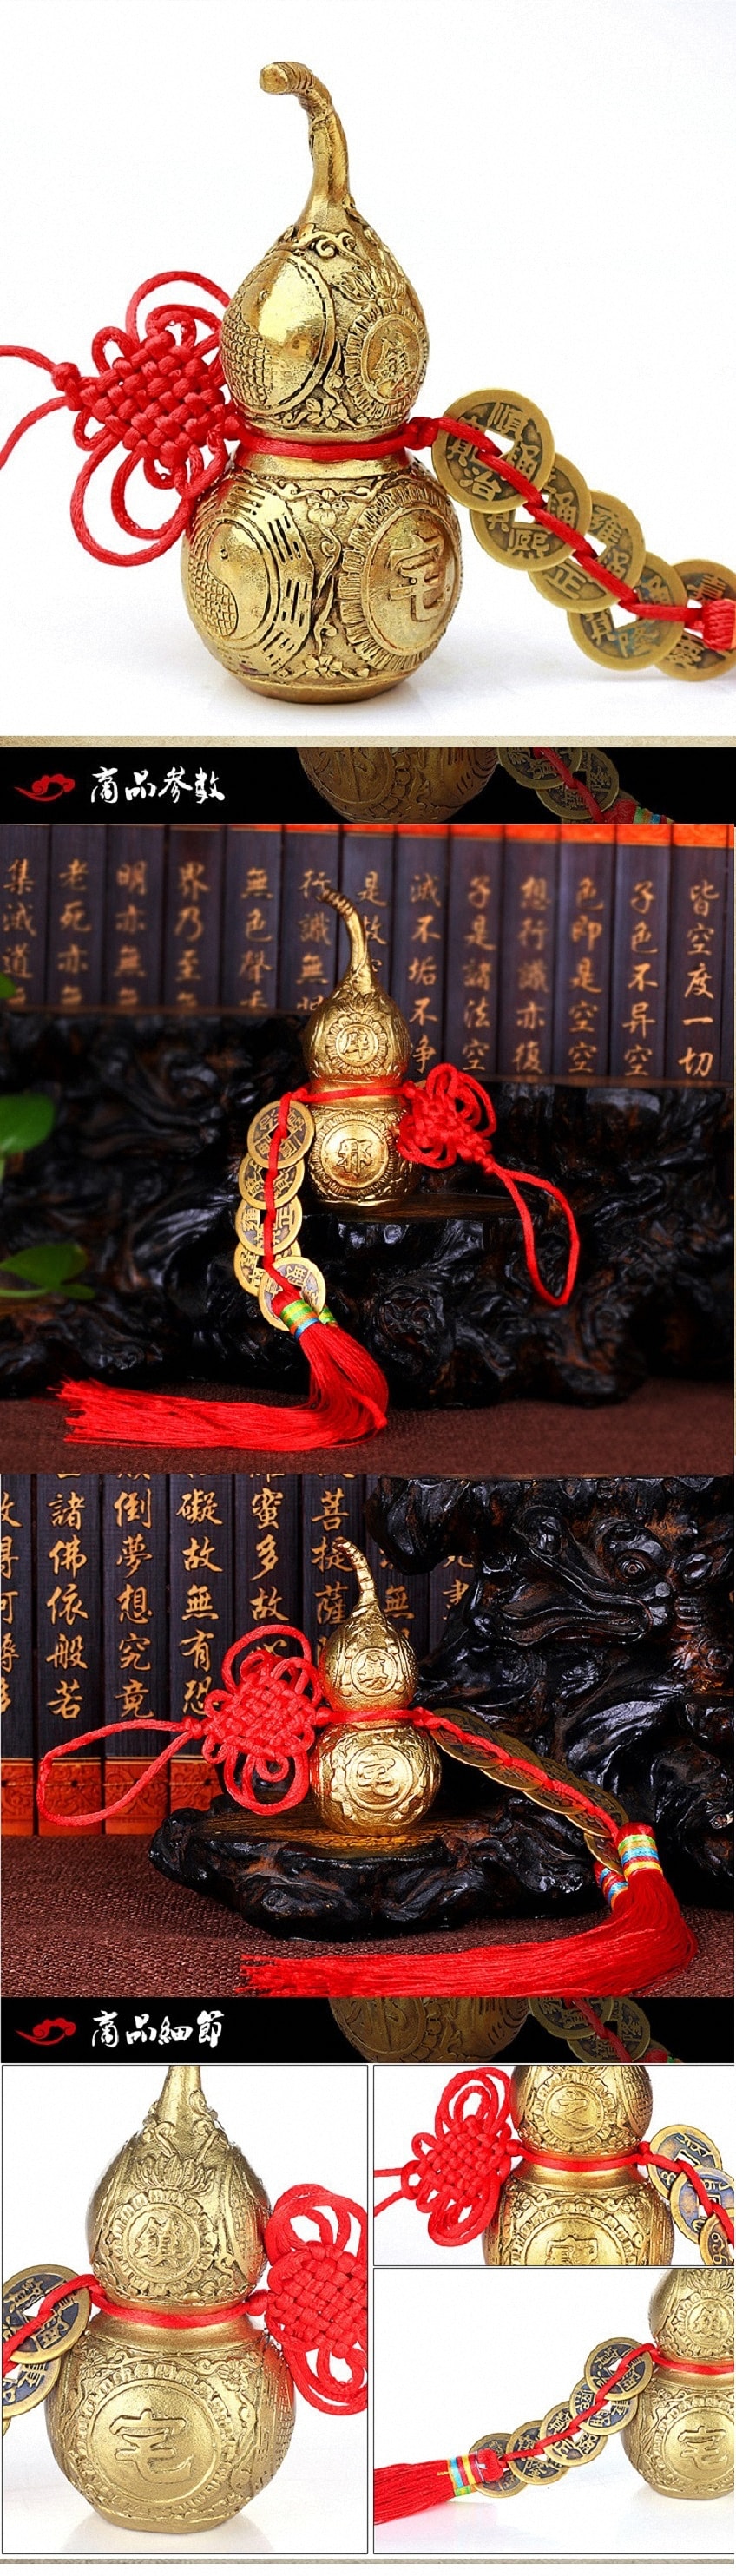 INK WASH Brass Calabash Luck Gourd Decoration with Red String